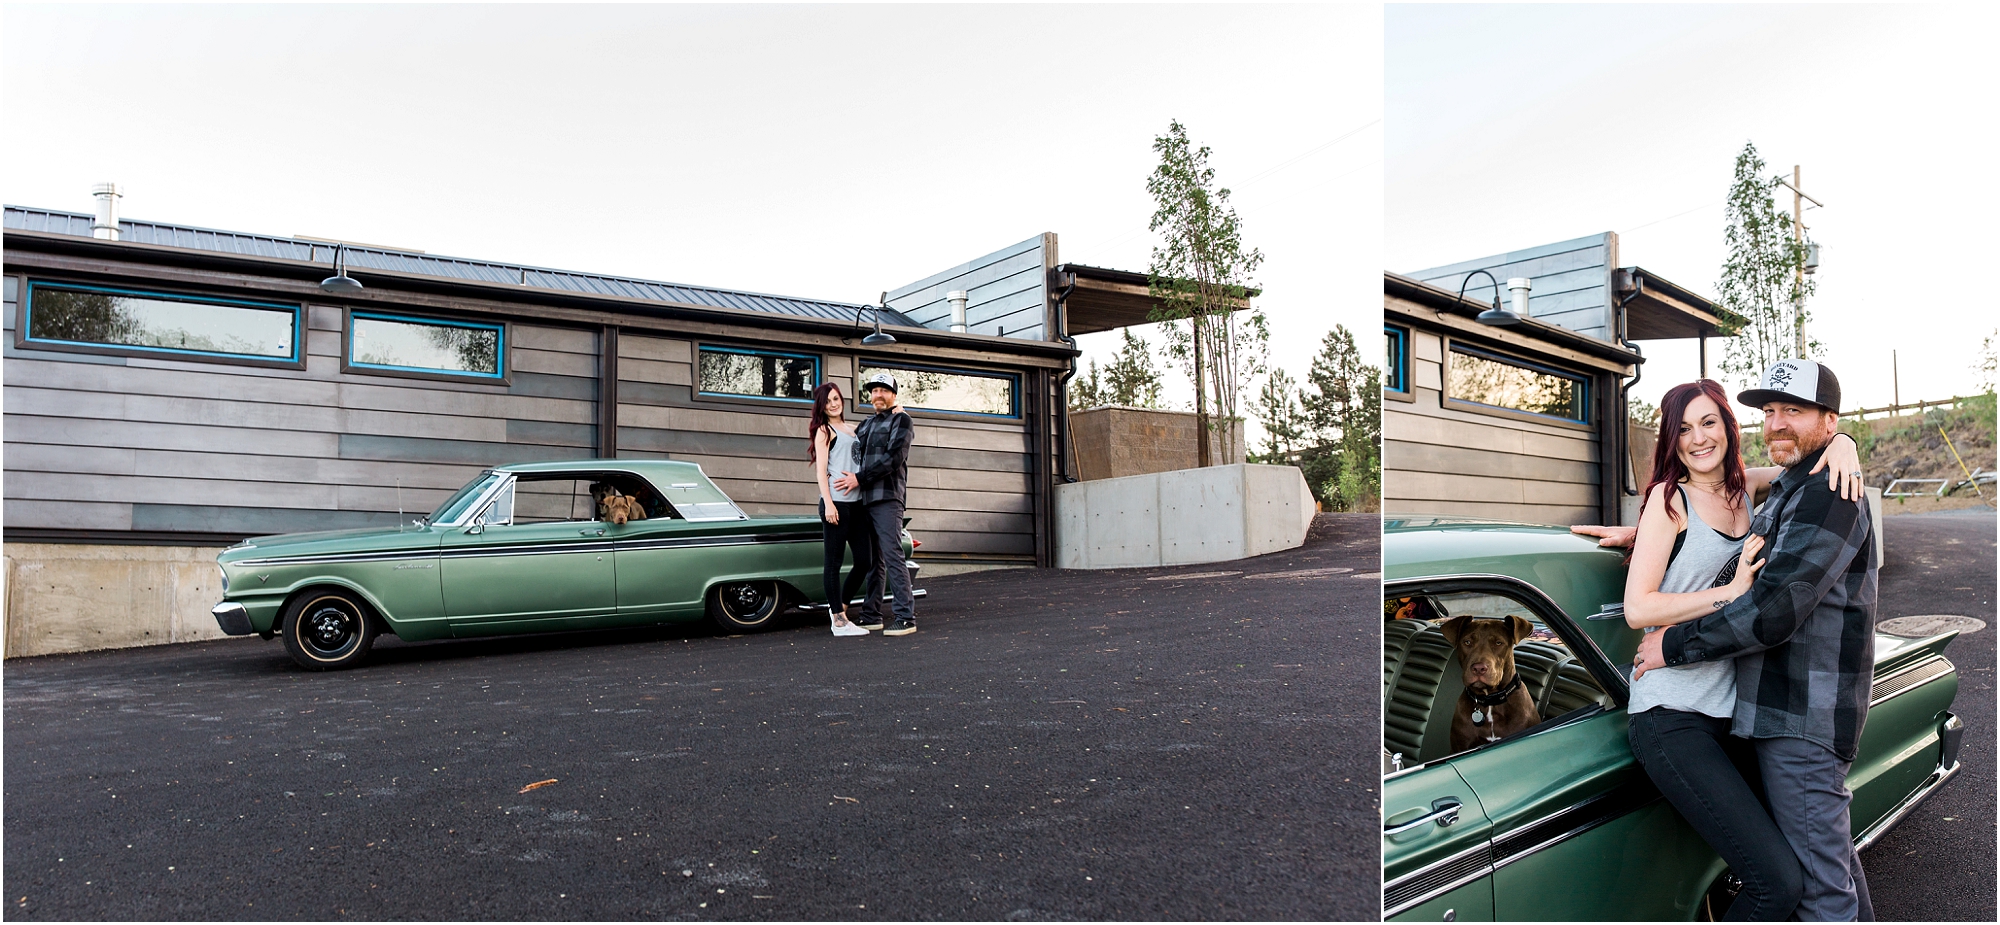 A couple poses with their classic Ford Fairlane in front of Boneyard Beer in Bend, OR for their engagement photos. | Erica Swantek Photography